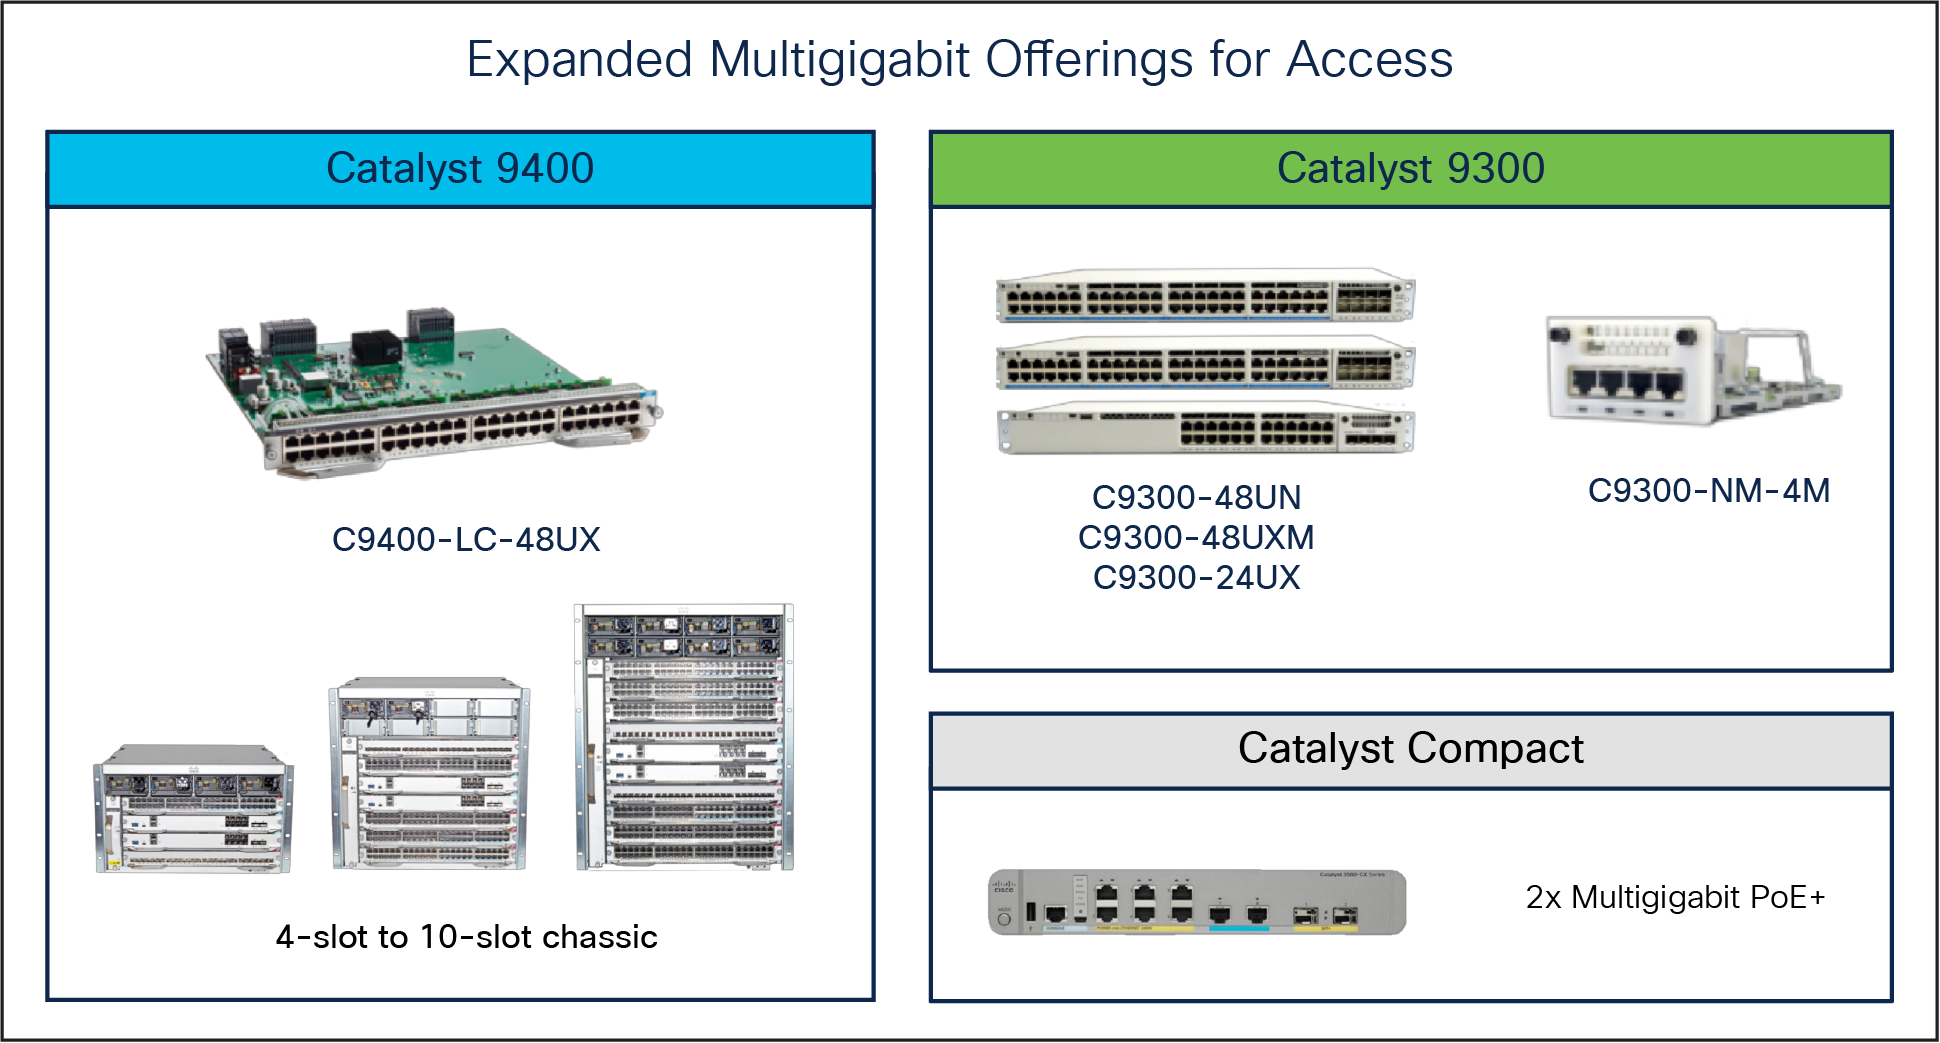 Cisco has a line of multigigabit products that can easily power these access points